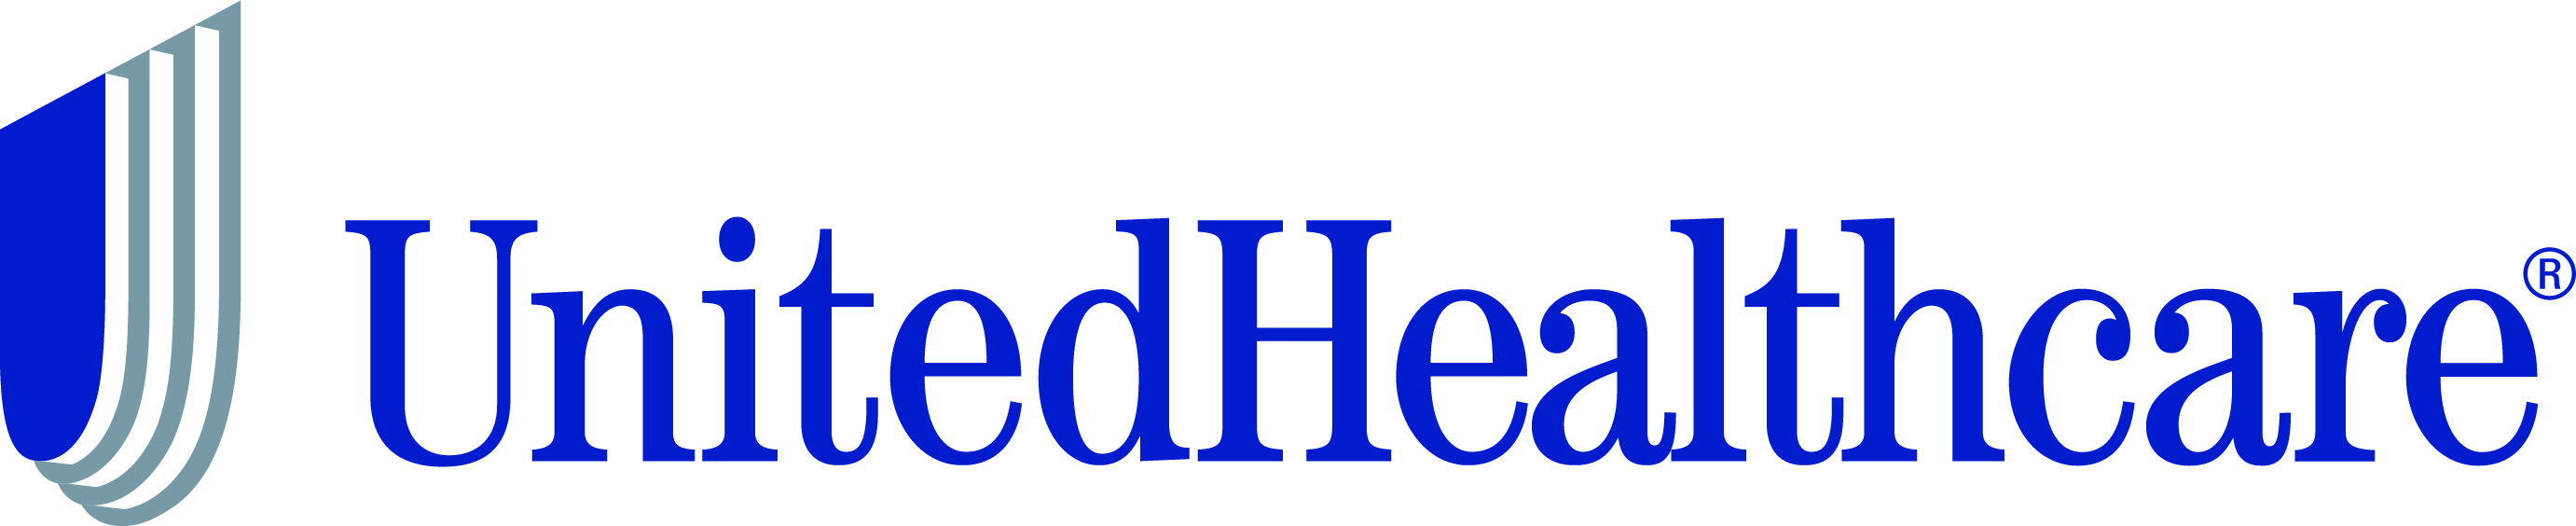 United Healthcare is a presenting sponsor of Give 5